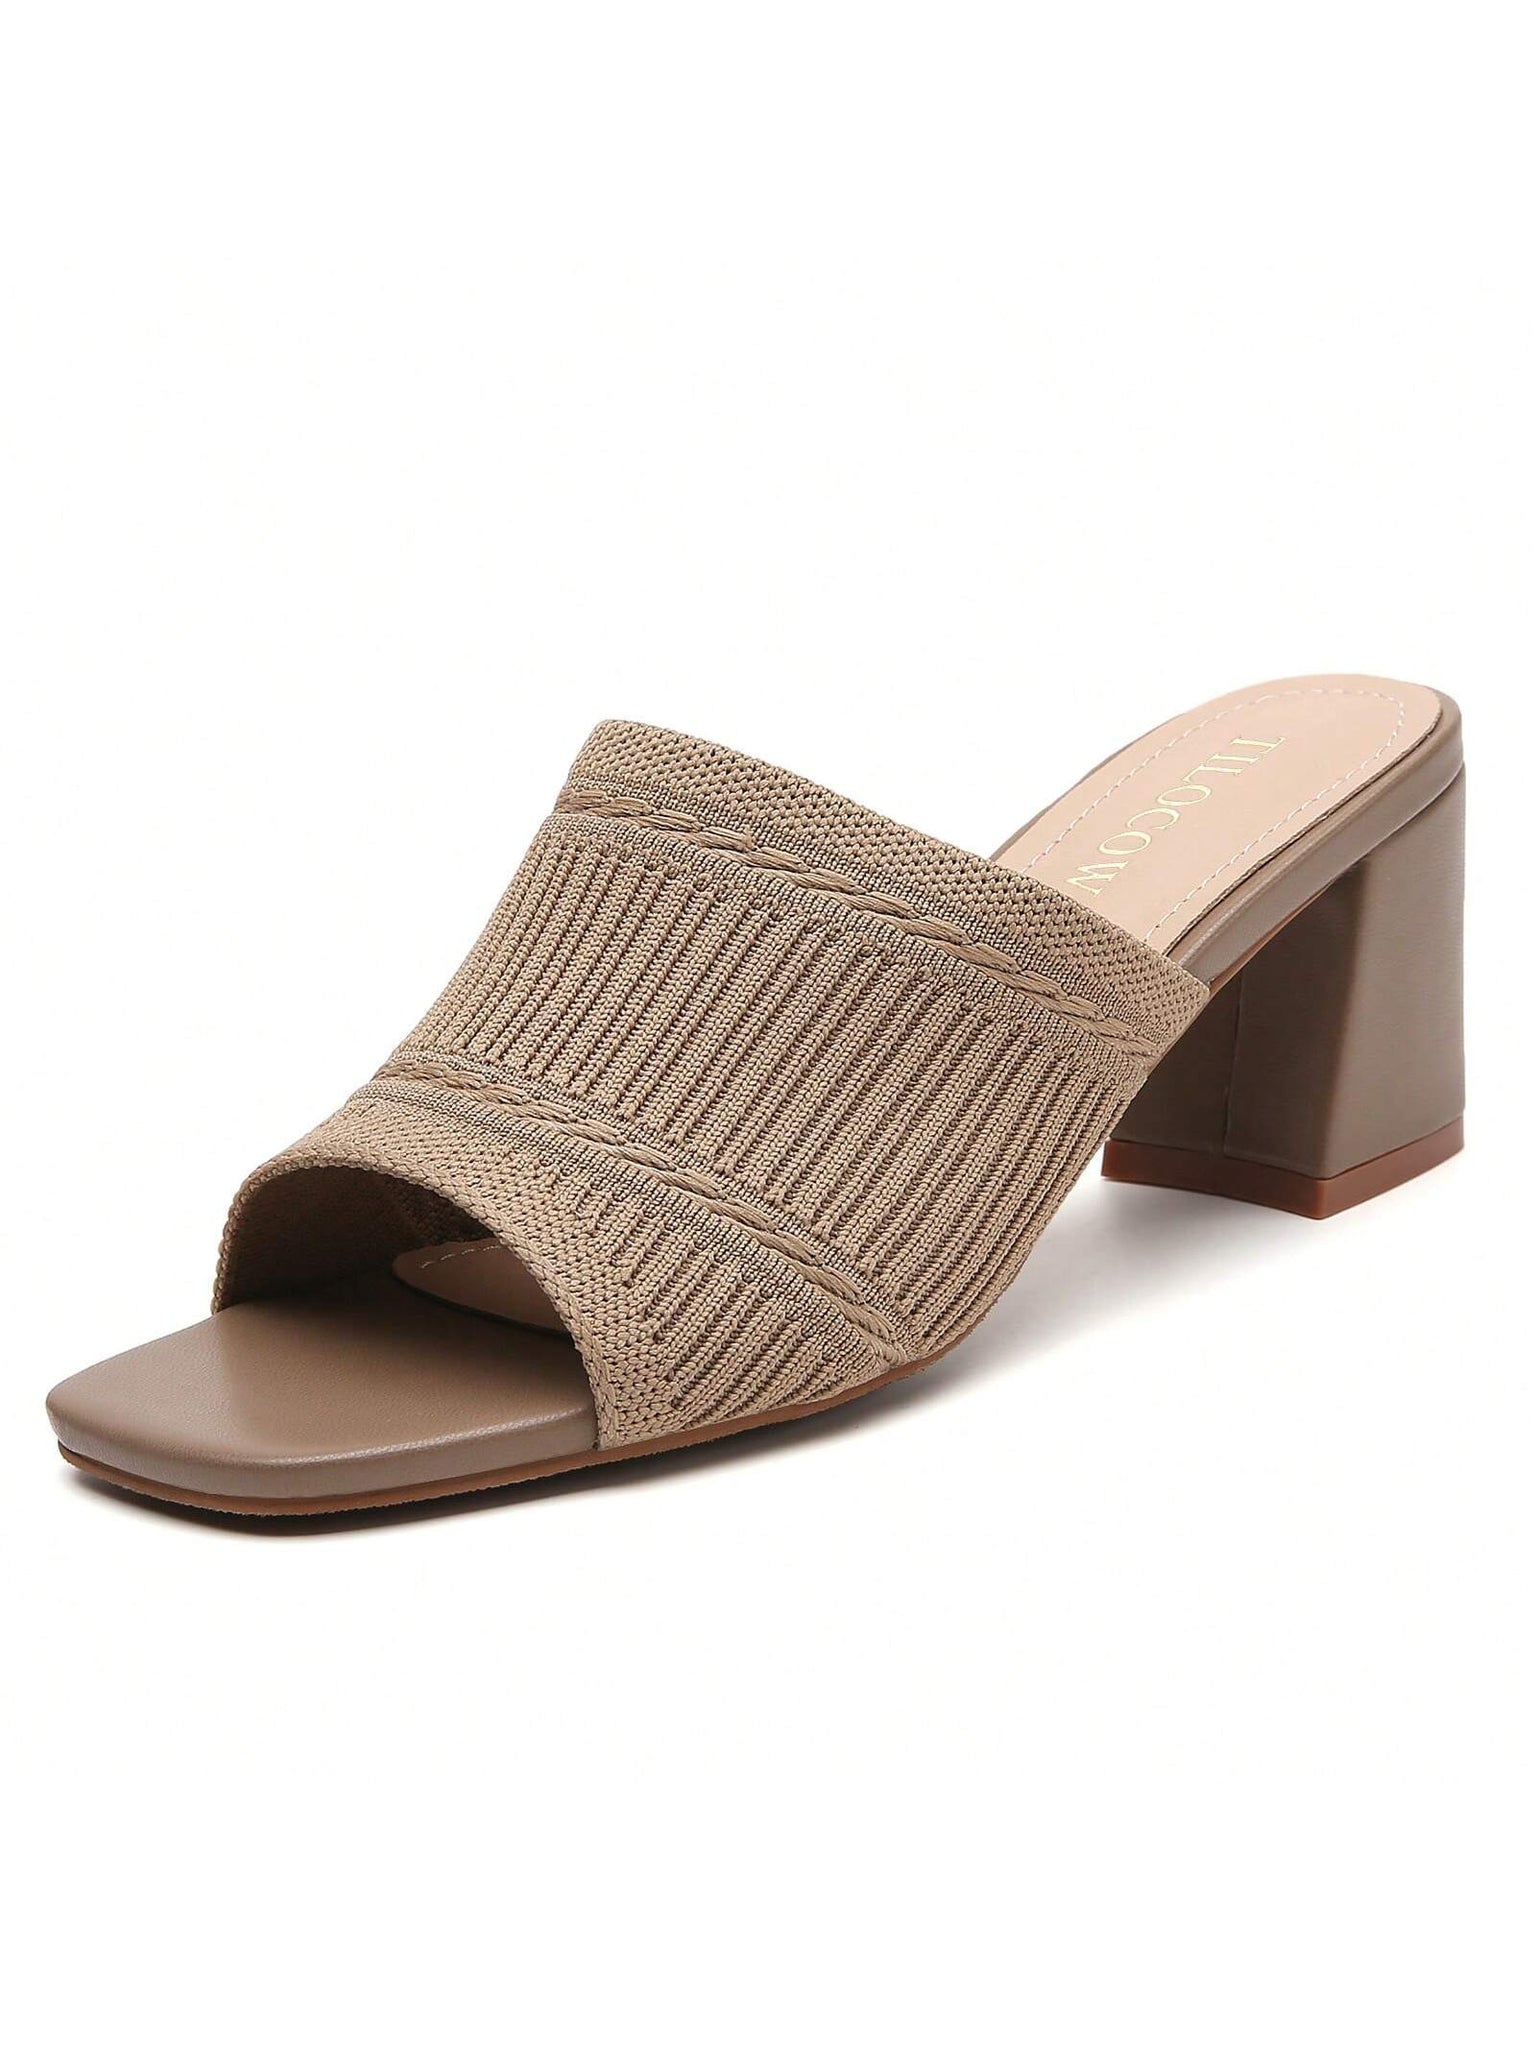 Tilocow Knit Heeled Sandals Chunky Low Block Heel Mules For Women Square Open Toe Heels Slip On Breathable Slides Sandal-Brown-1